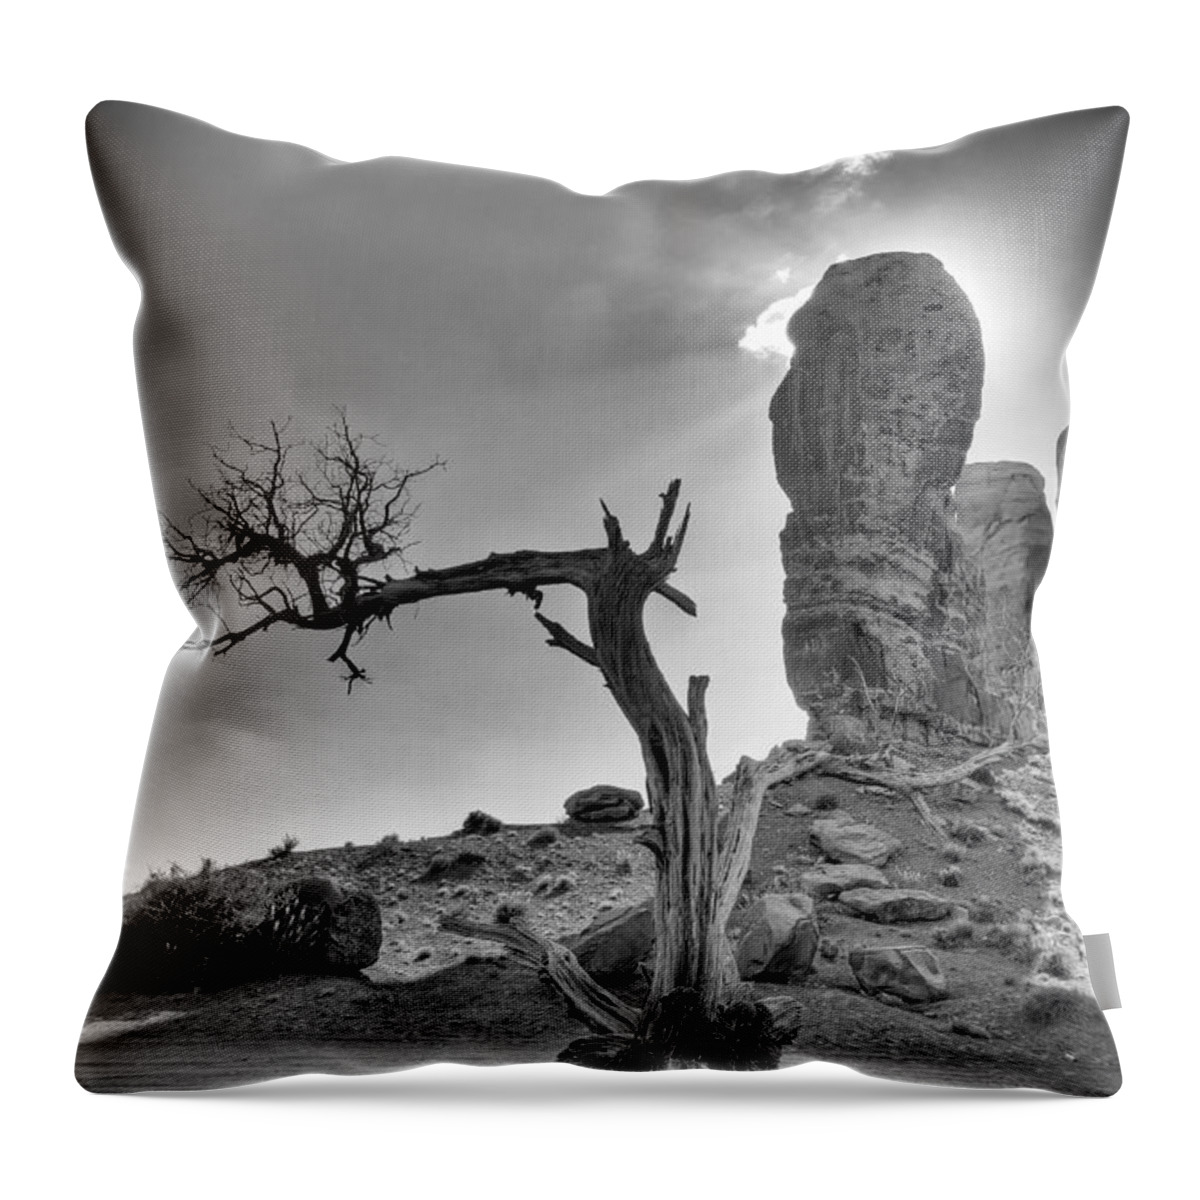 America Throw Pillow featuring the photograph The Old Tree by Andreas Freund